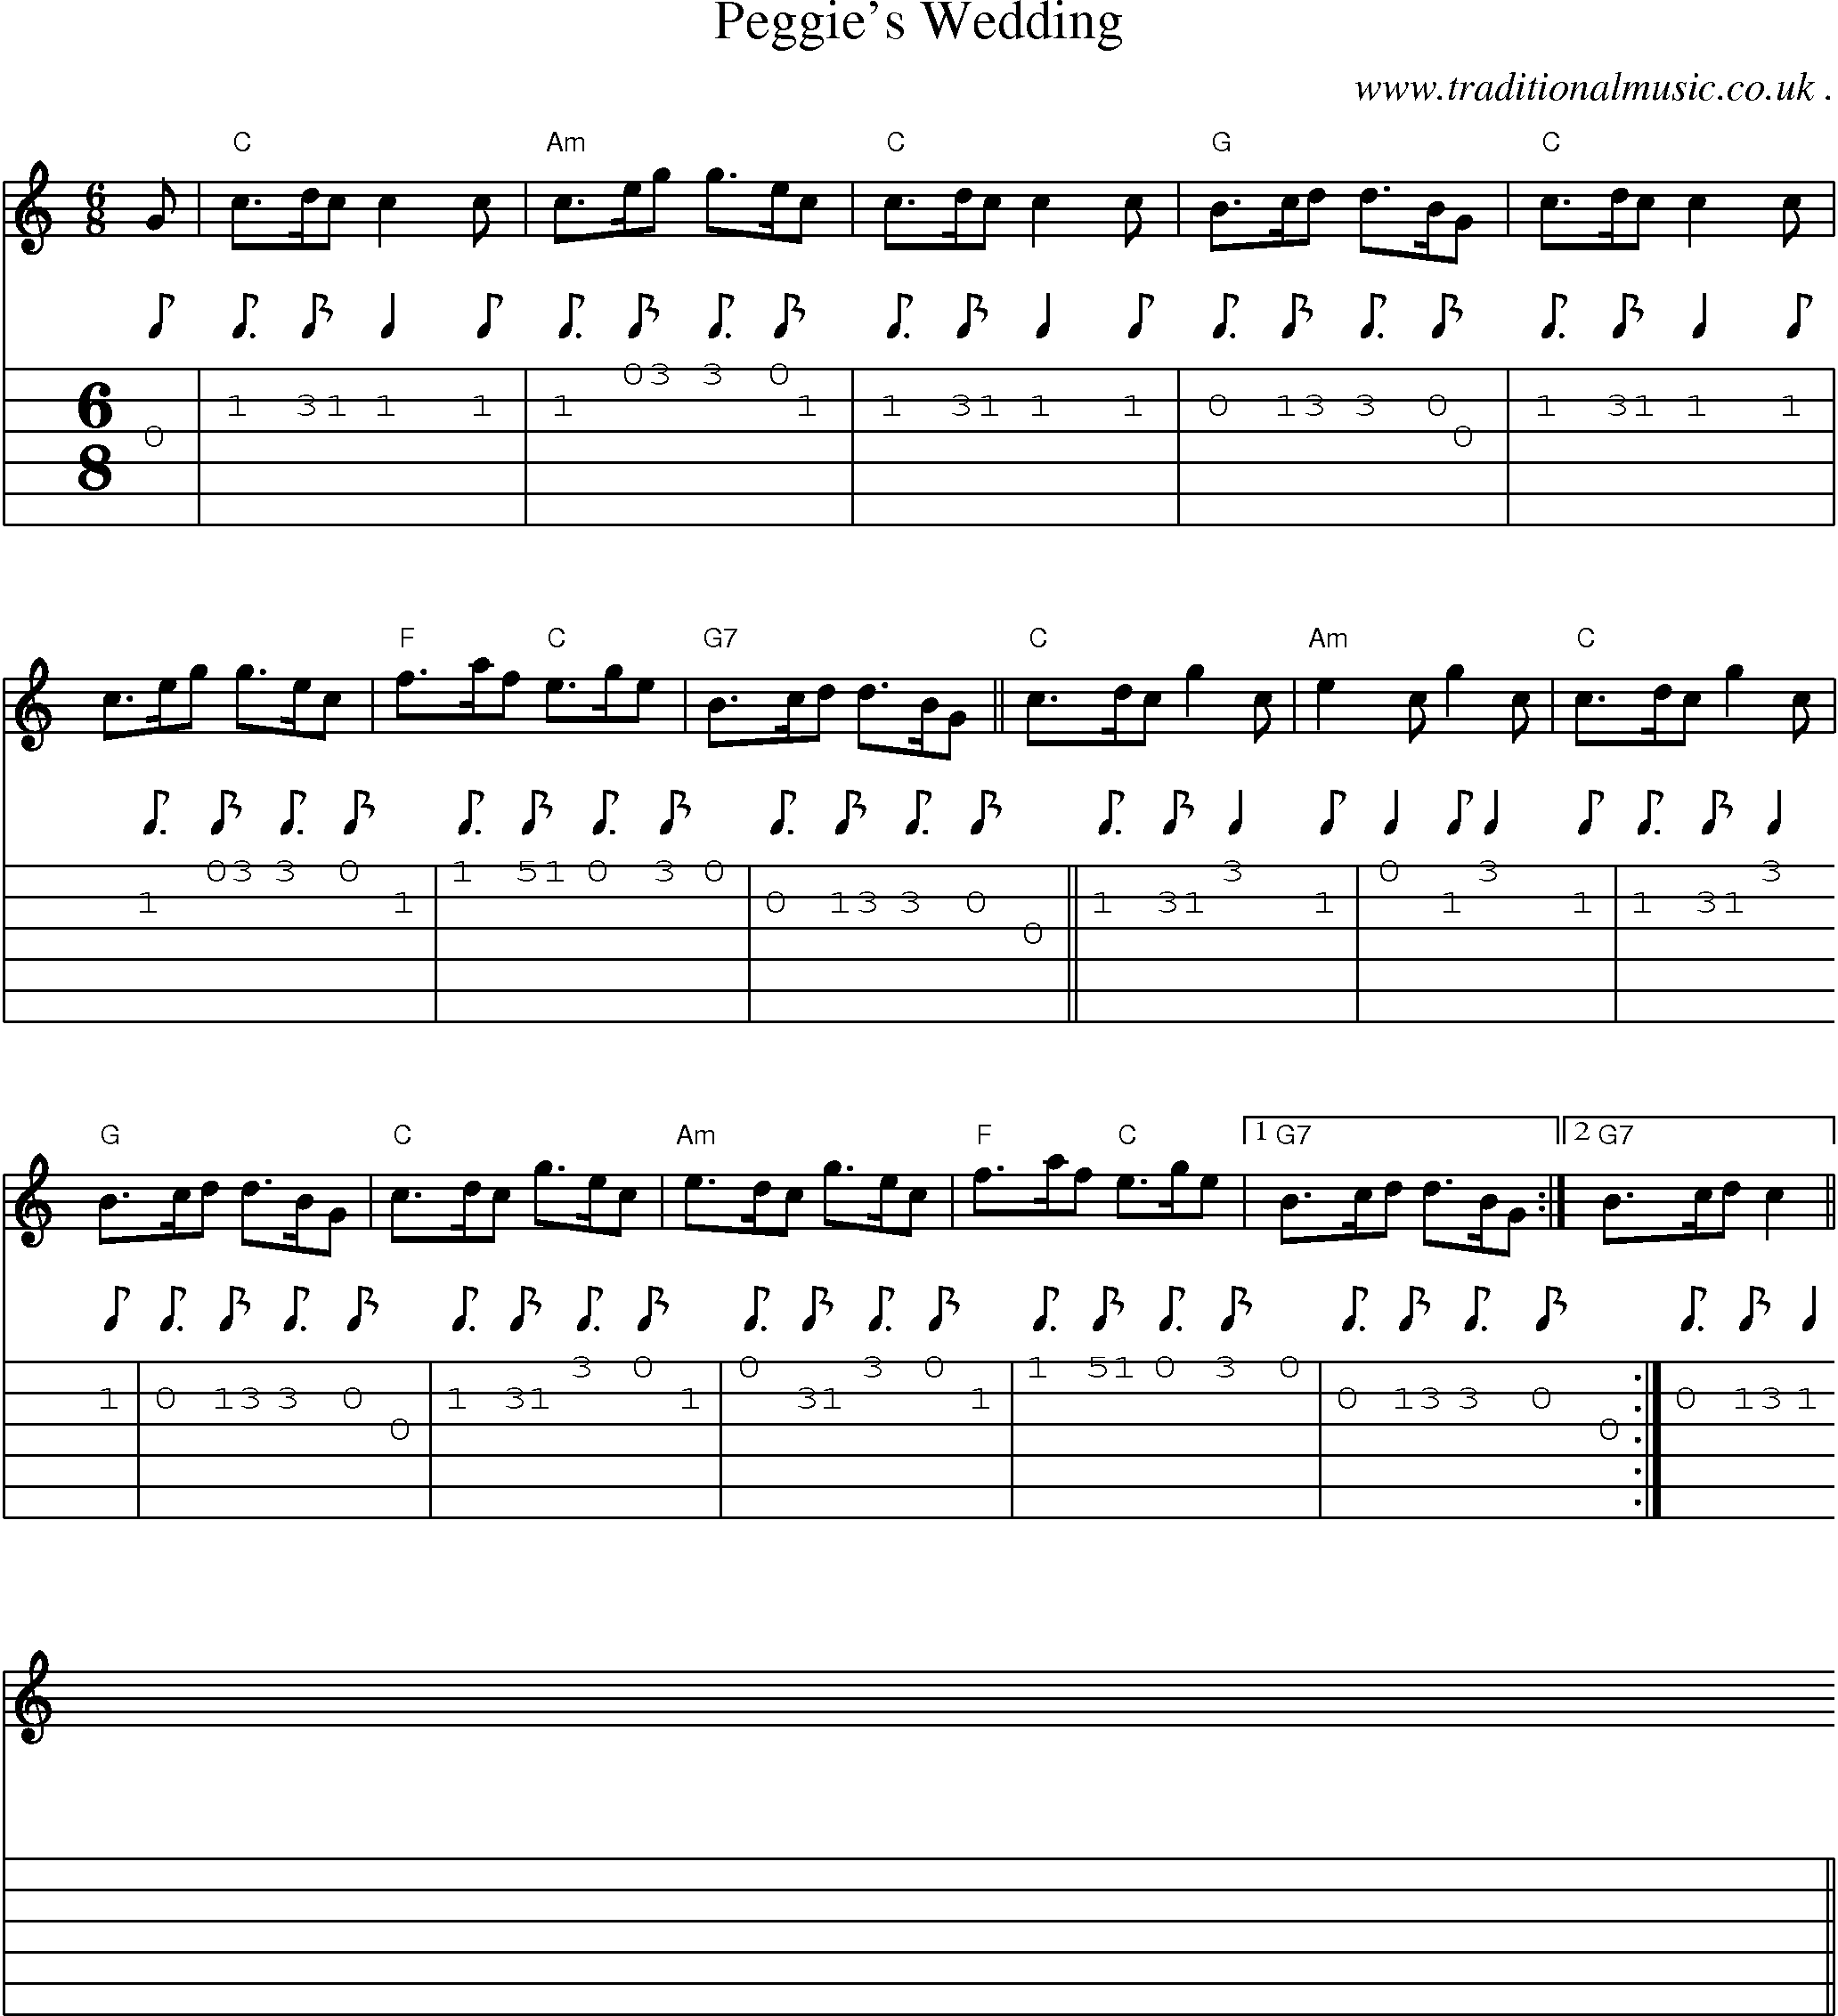 Sheet-music  score, Chords and Guitar Tabs for Peggies Wedding